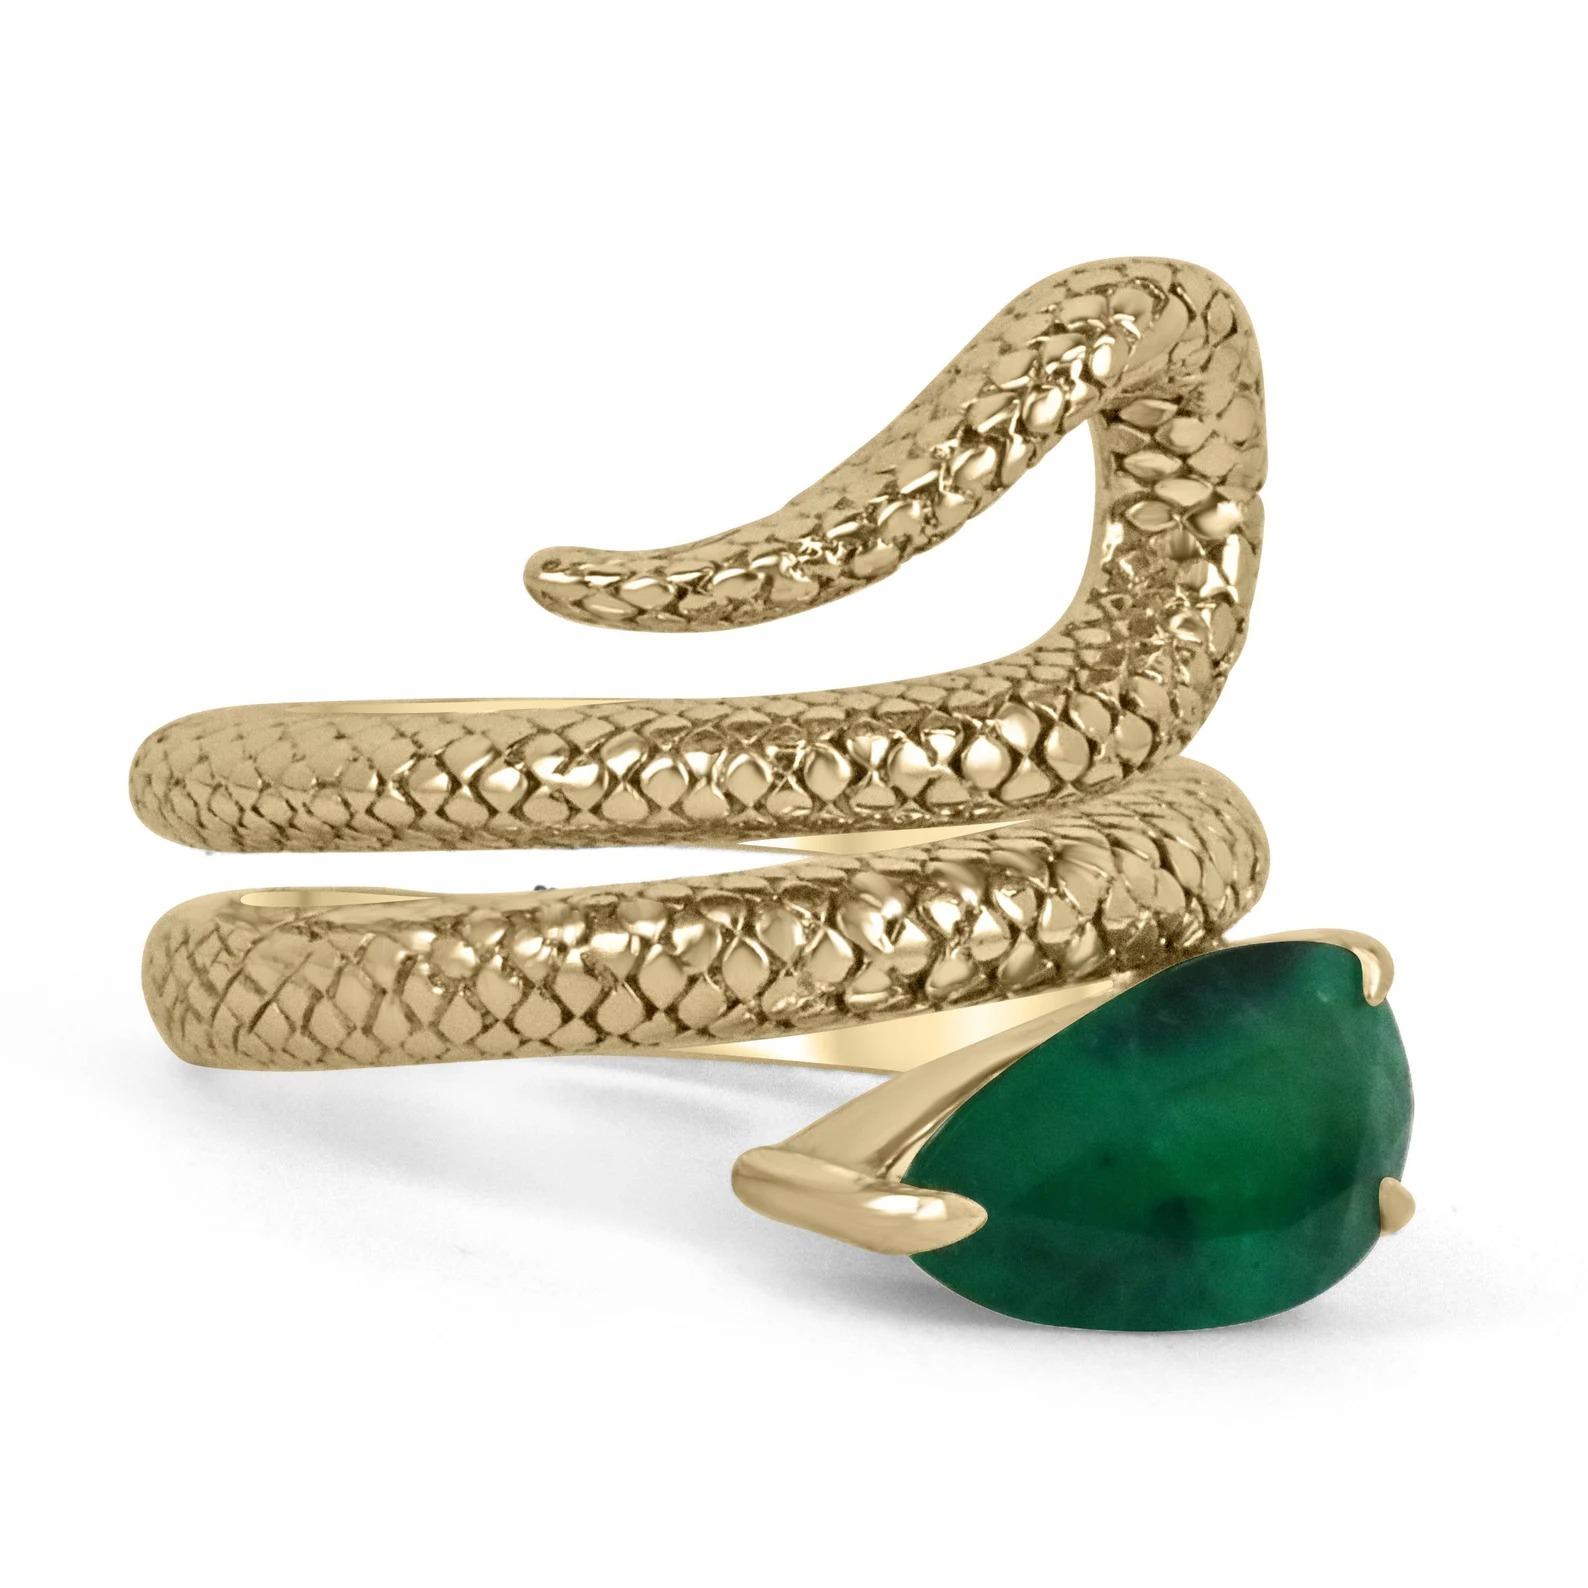  A ring, as enchanting and enthralling as a rattlesnake's rattle tail. This distinctive design, created by Natalie Rodriguez; showcases a remarkable VIVID DARK 2.18-carat, natural Colombian pear cut emerald that displays a ravishing and desirable